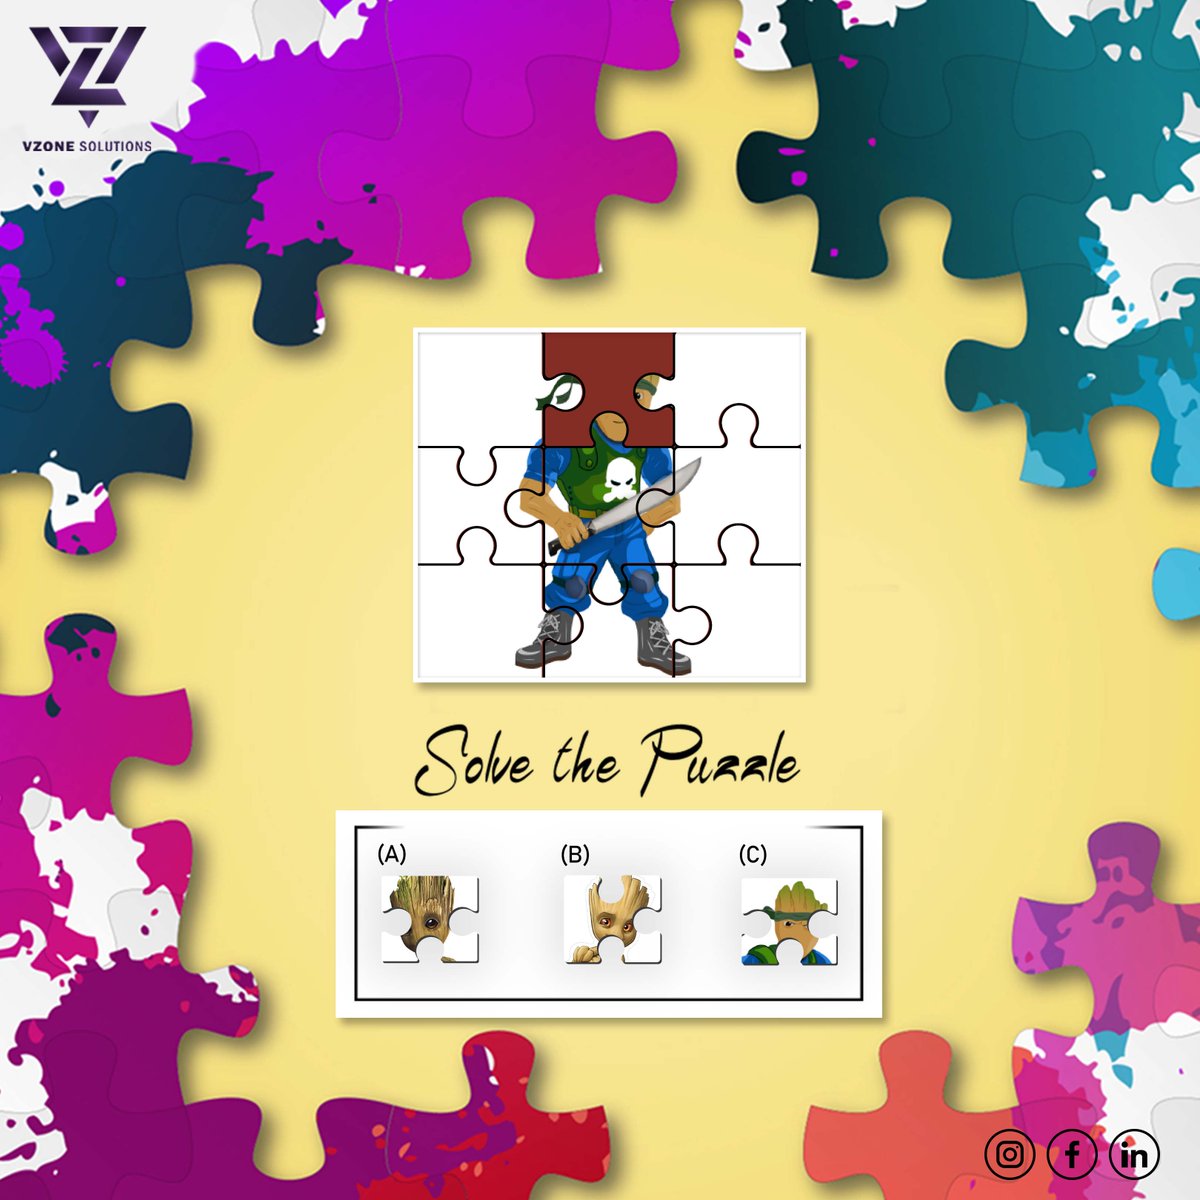 '🕵️‍♀️🧩 Ready to put your mind to the test? Introducing the 'Crack the Code Challenge'! 🚀🔐 Solve clues, unravel riddles, and unlock the treasure. Are you up for the challenge? 💎💬
.
.
.
.
#vzone #vzonesolutions #puzzle #solve #solveit #character #CrackTheCodeChallenge